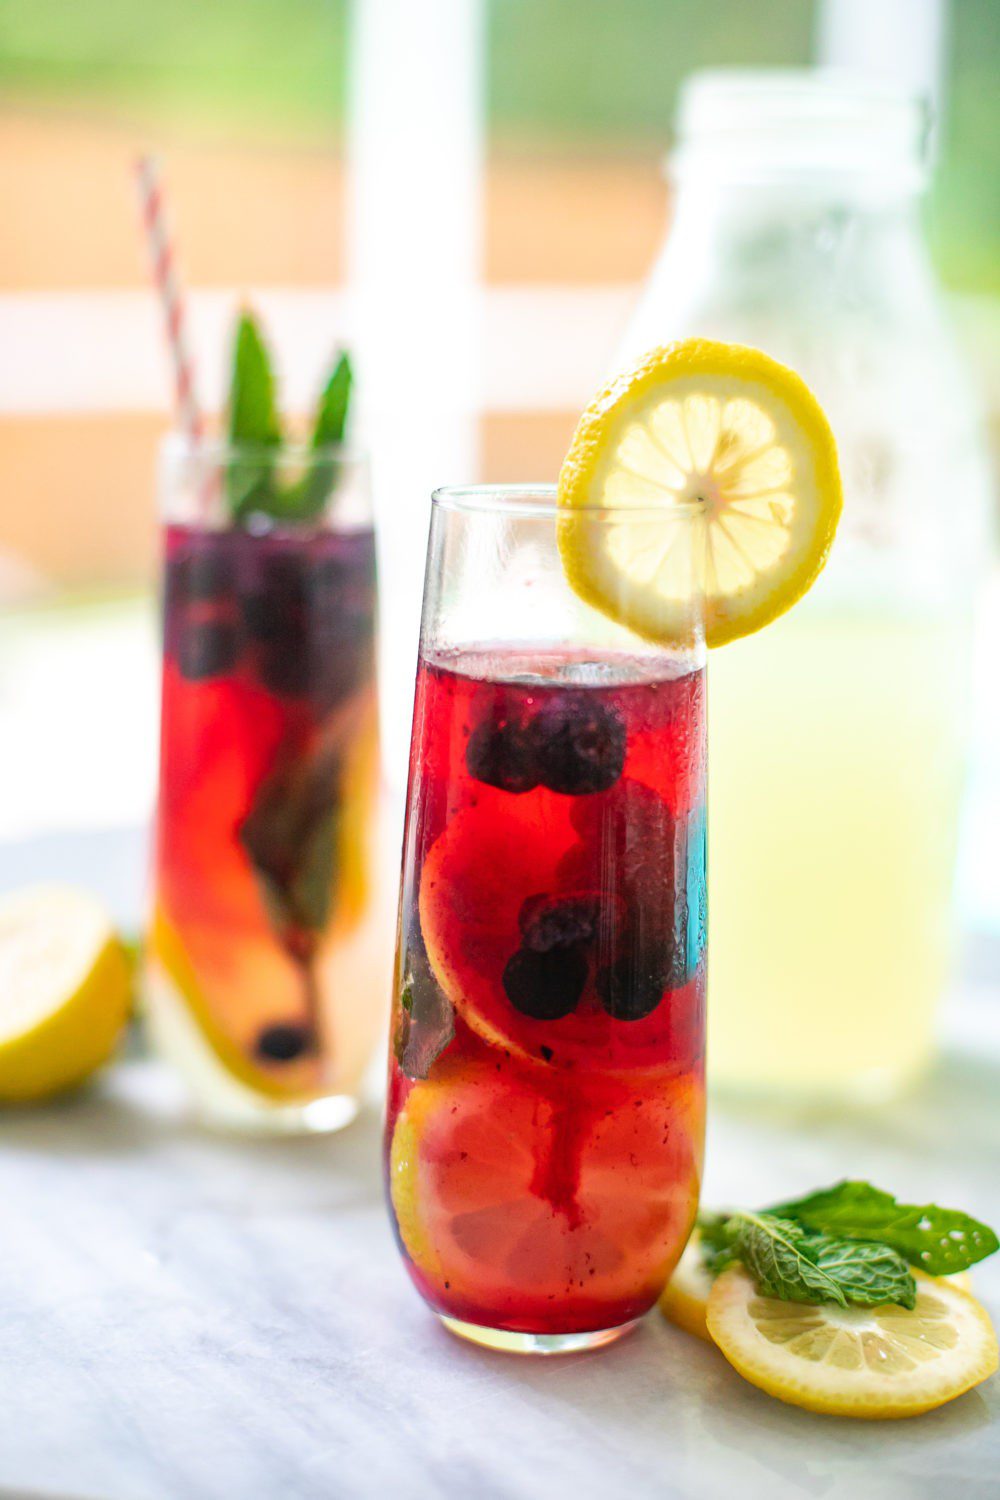 Refreshingly Easy Summer Mocktail Recipes! by popular Florida lifestyle blog, Fresh Mommy: image of Minty Blueberry Lemonade Summer Mocktail Spritzer with a pink and white stripe straw and a lemon slice on the rim of the cup and some fresh mint leaves in the top of the drink.